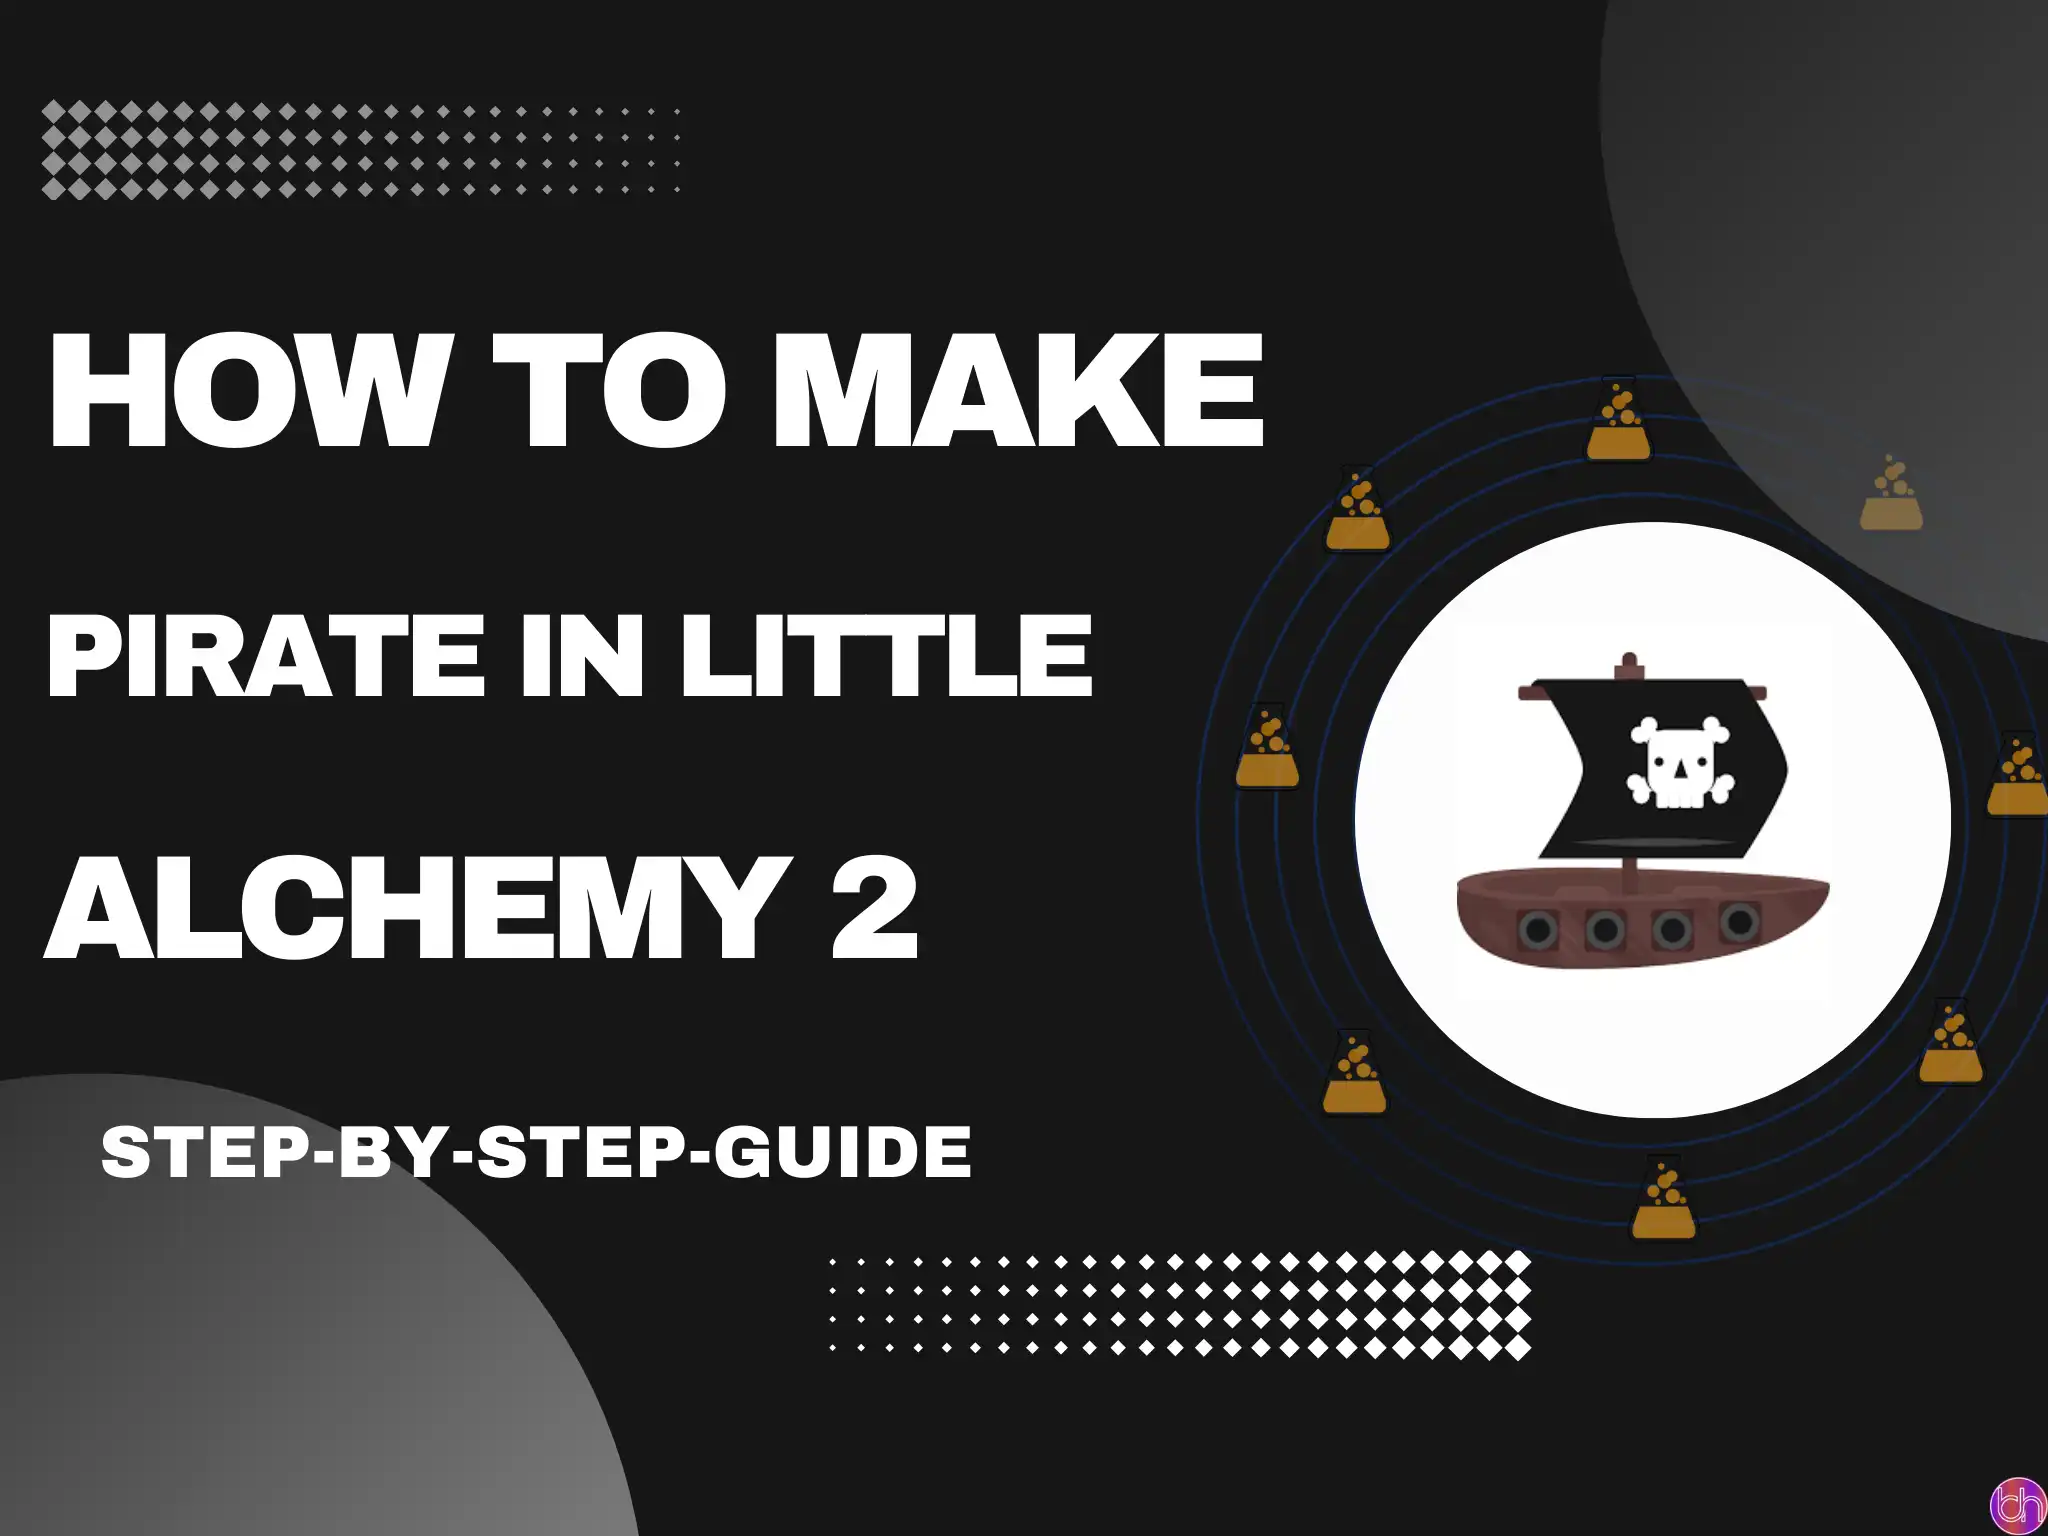 How to make Pirate in Little Alchemy 2